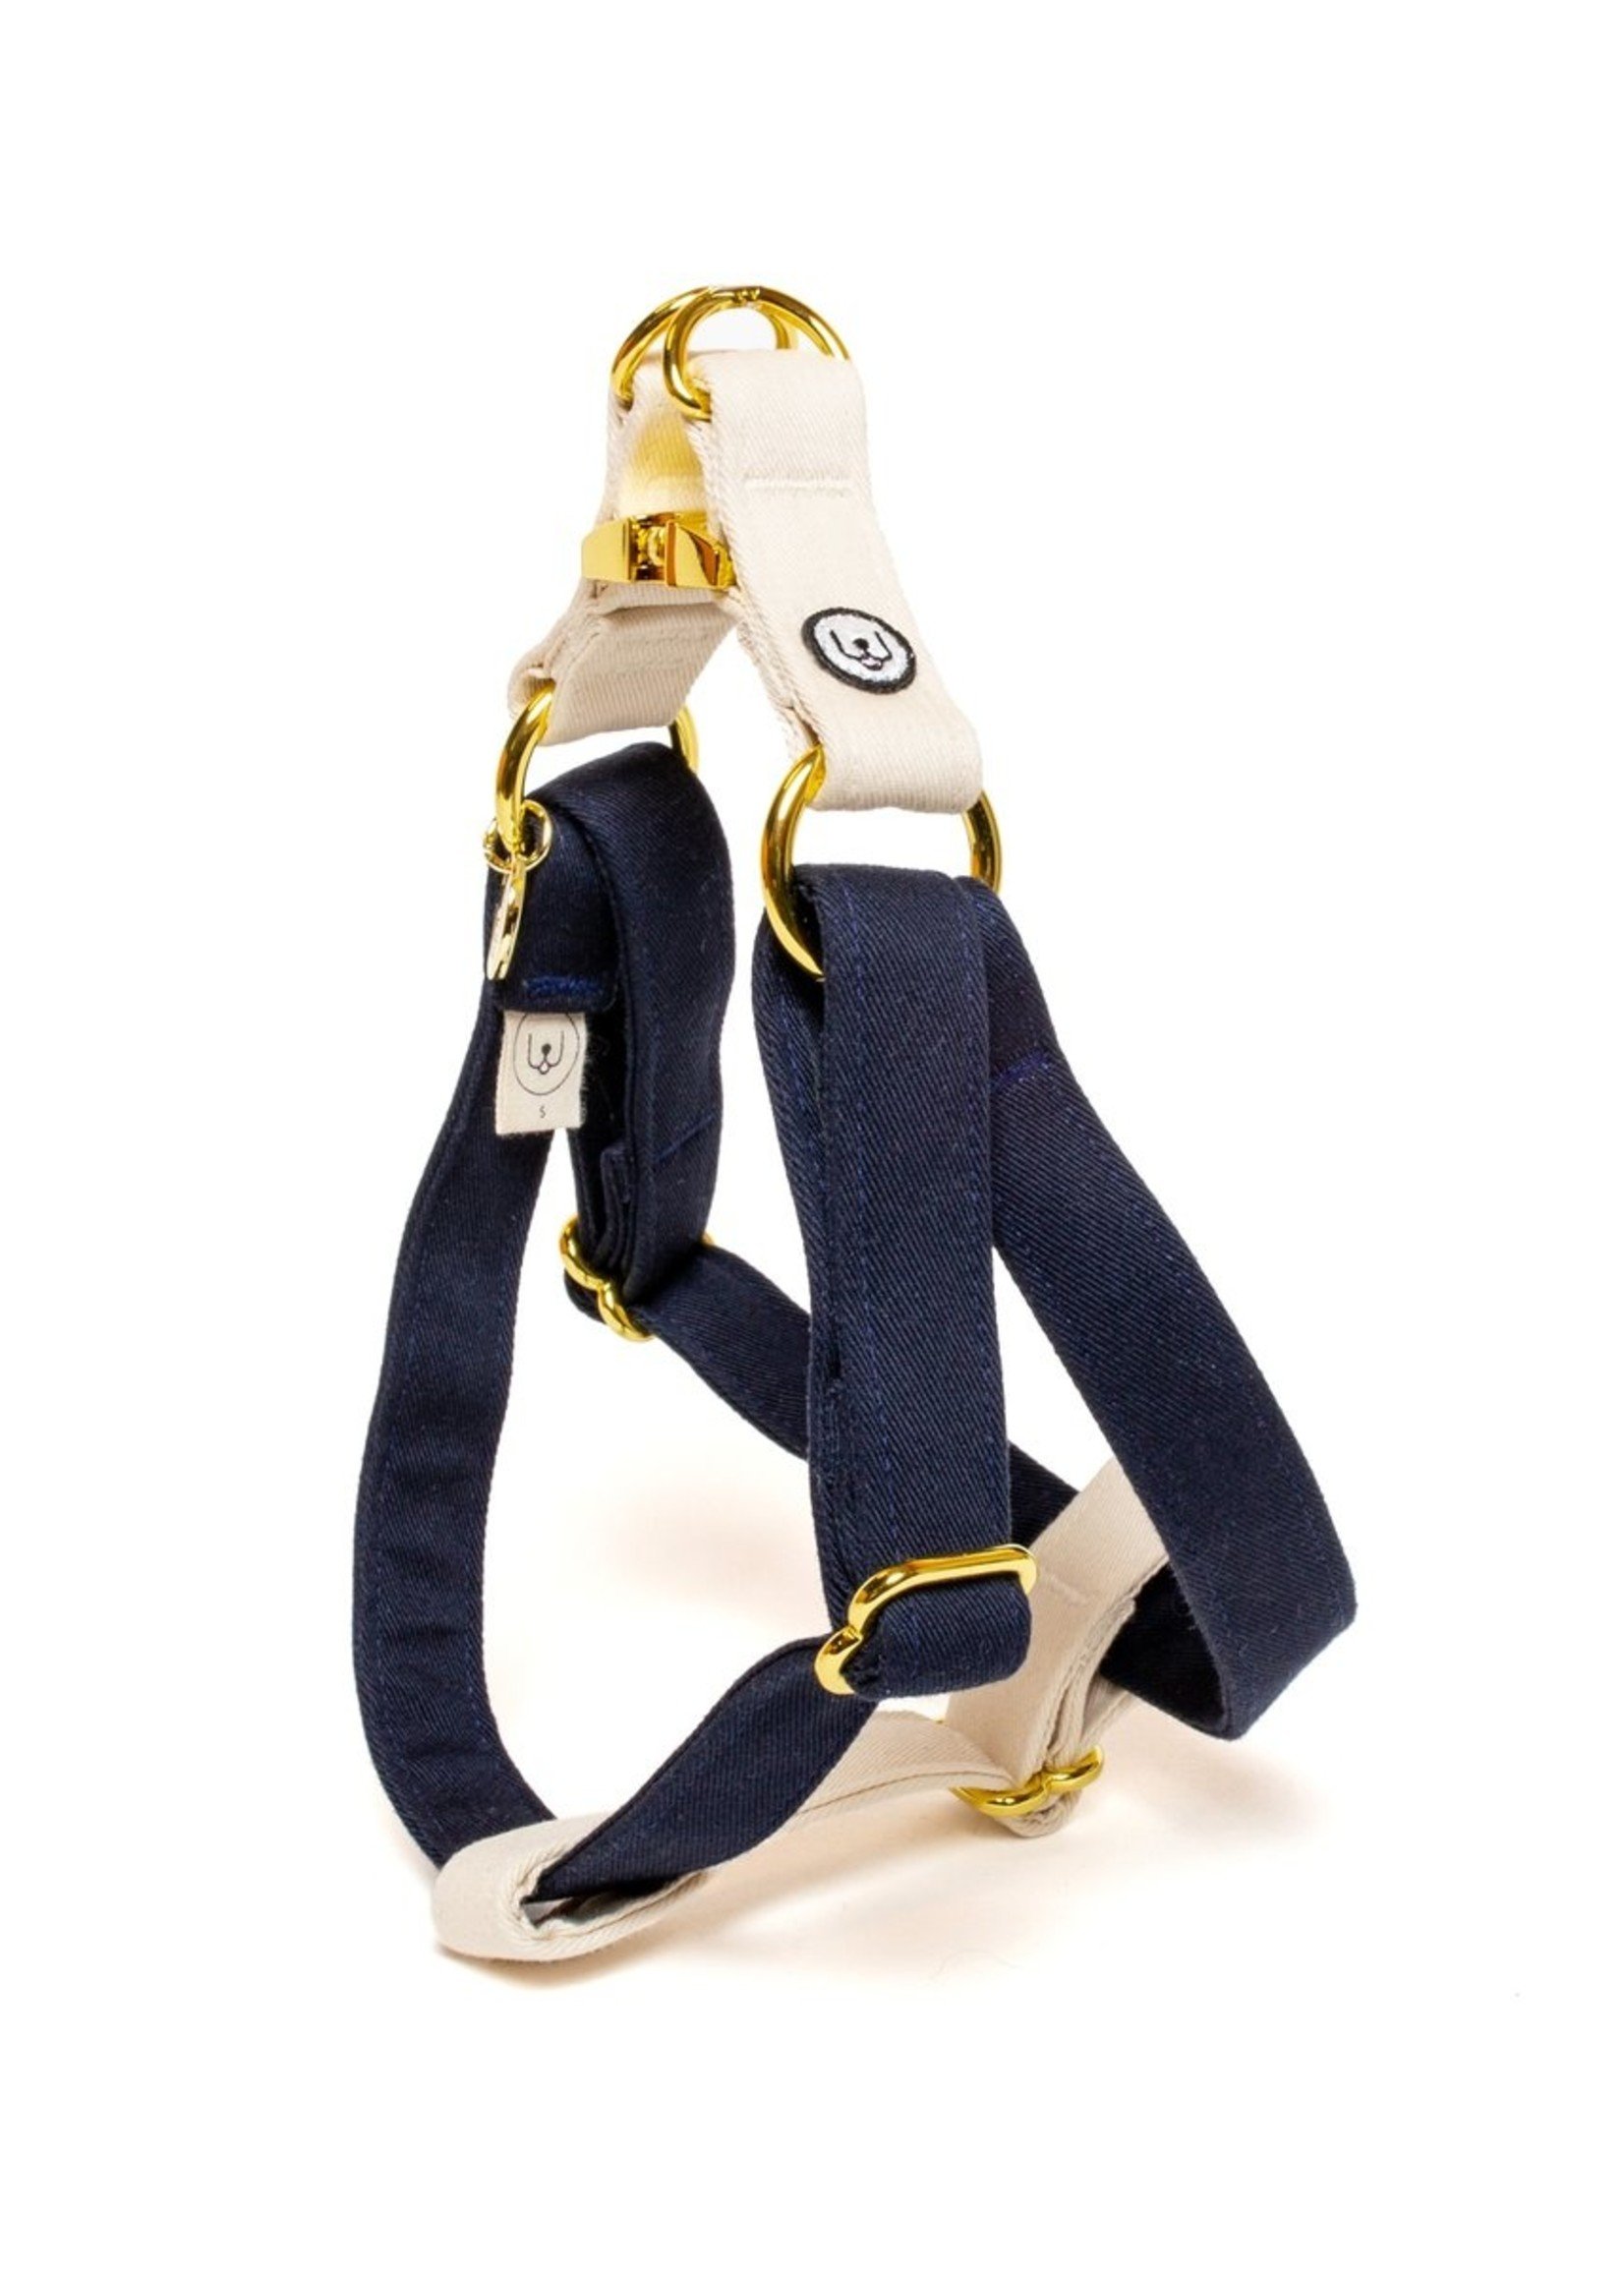 Eat Play Wag Eat Play Wag - Navy Ivory Step-In Harness